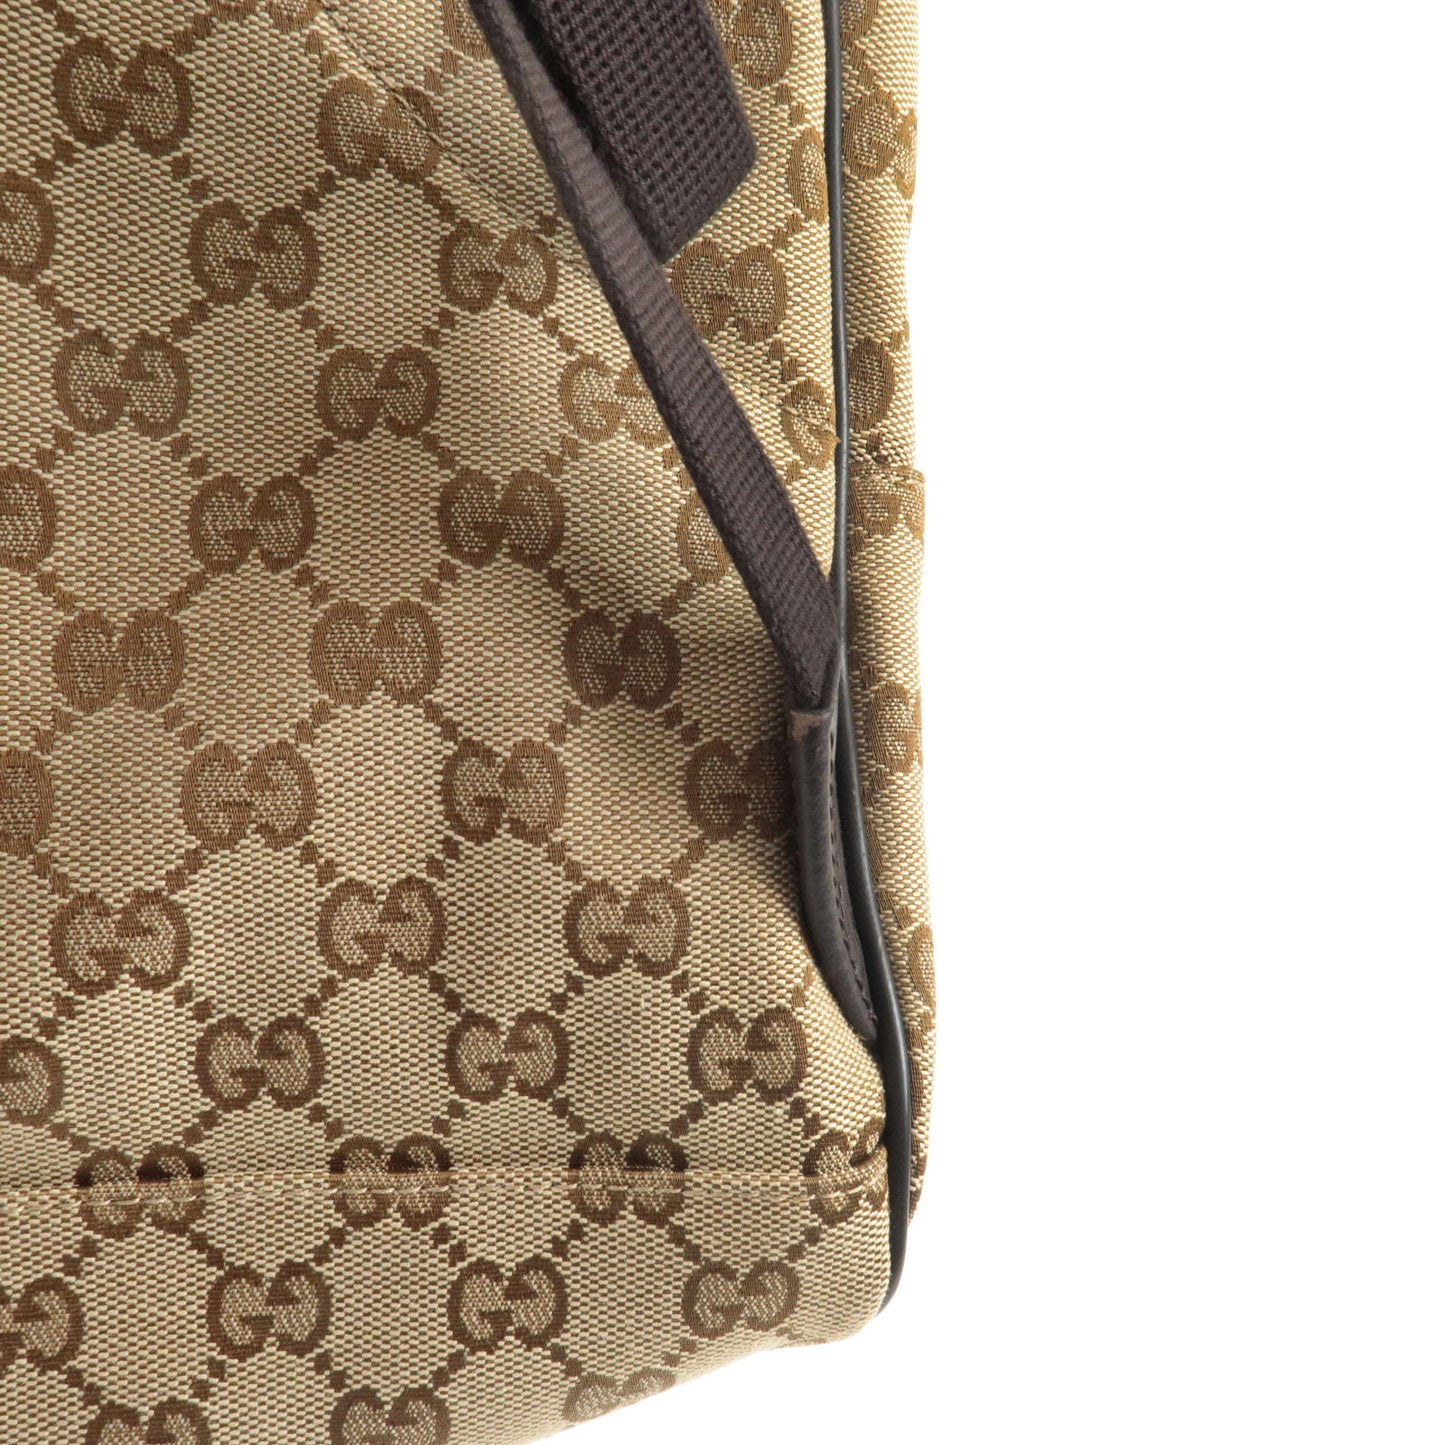 GUCCI GG Canvas Leather Ruck Sack Back Pack Beige Brown 449906